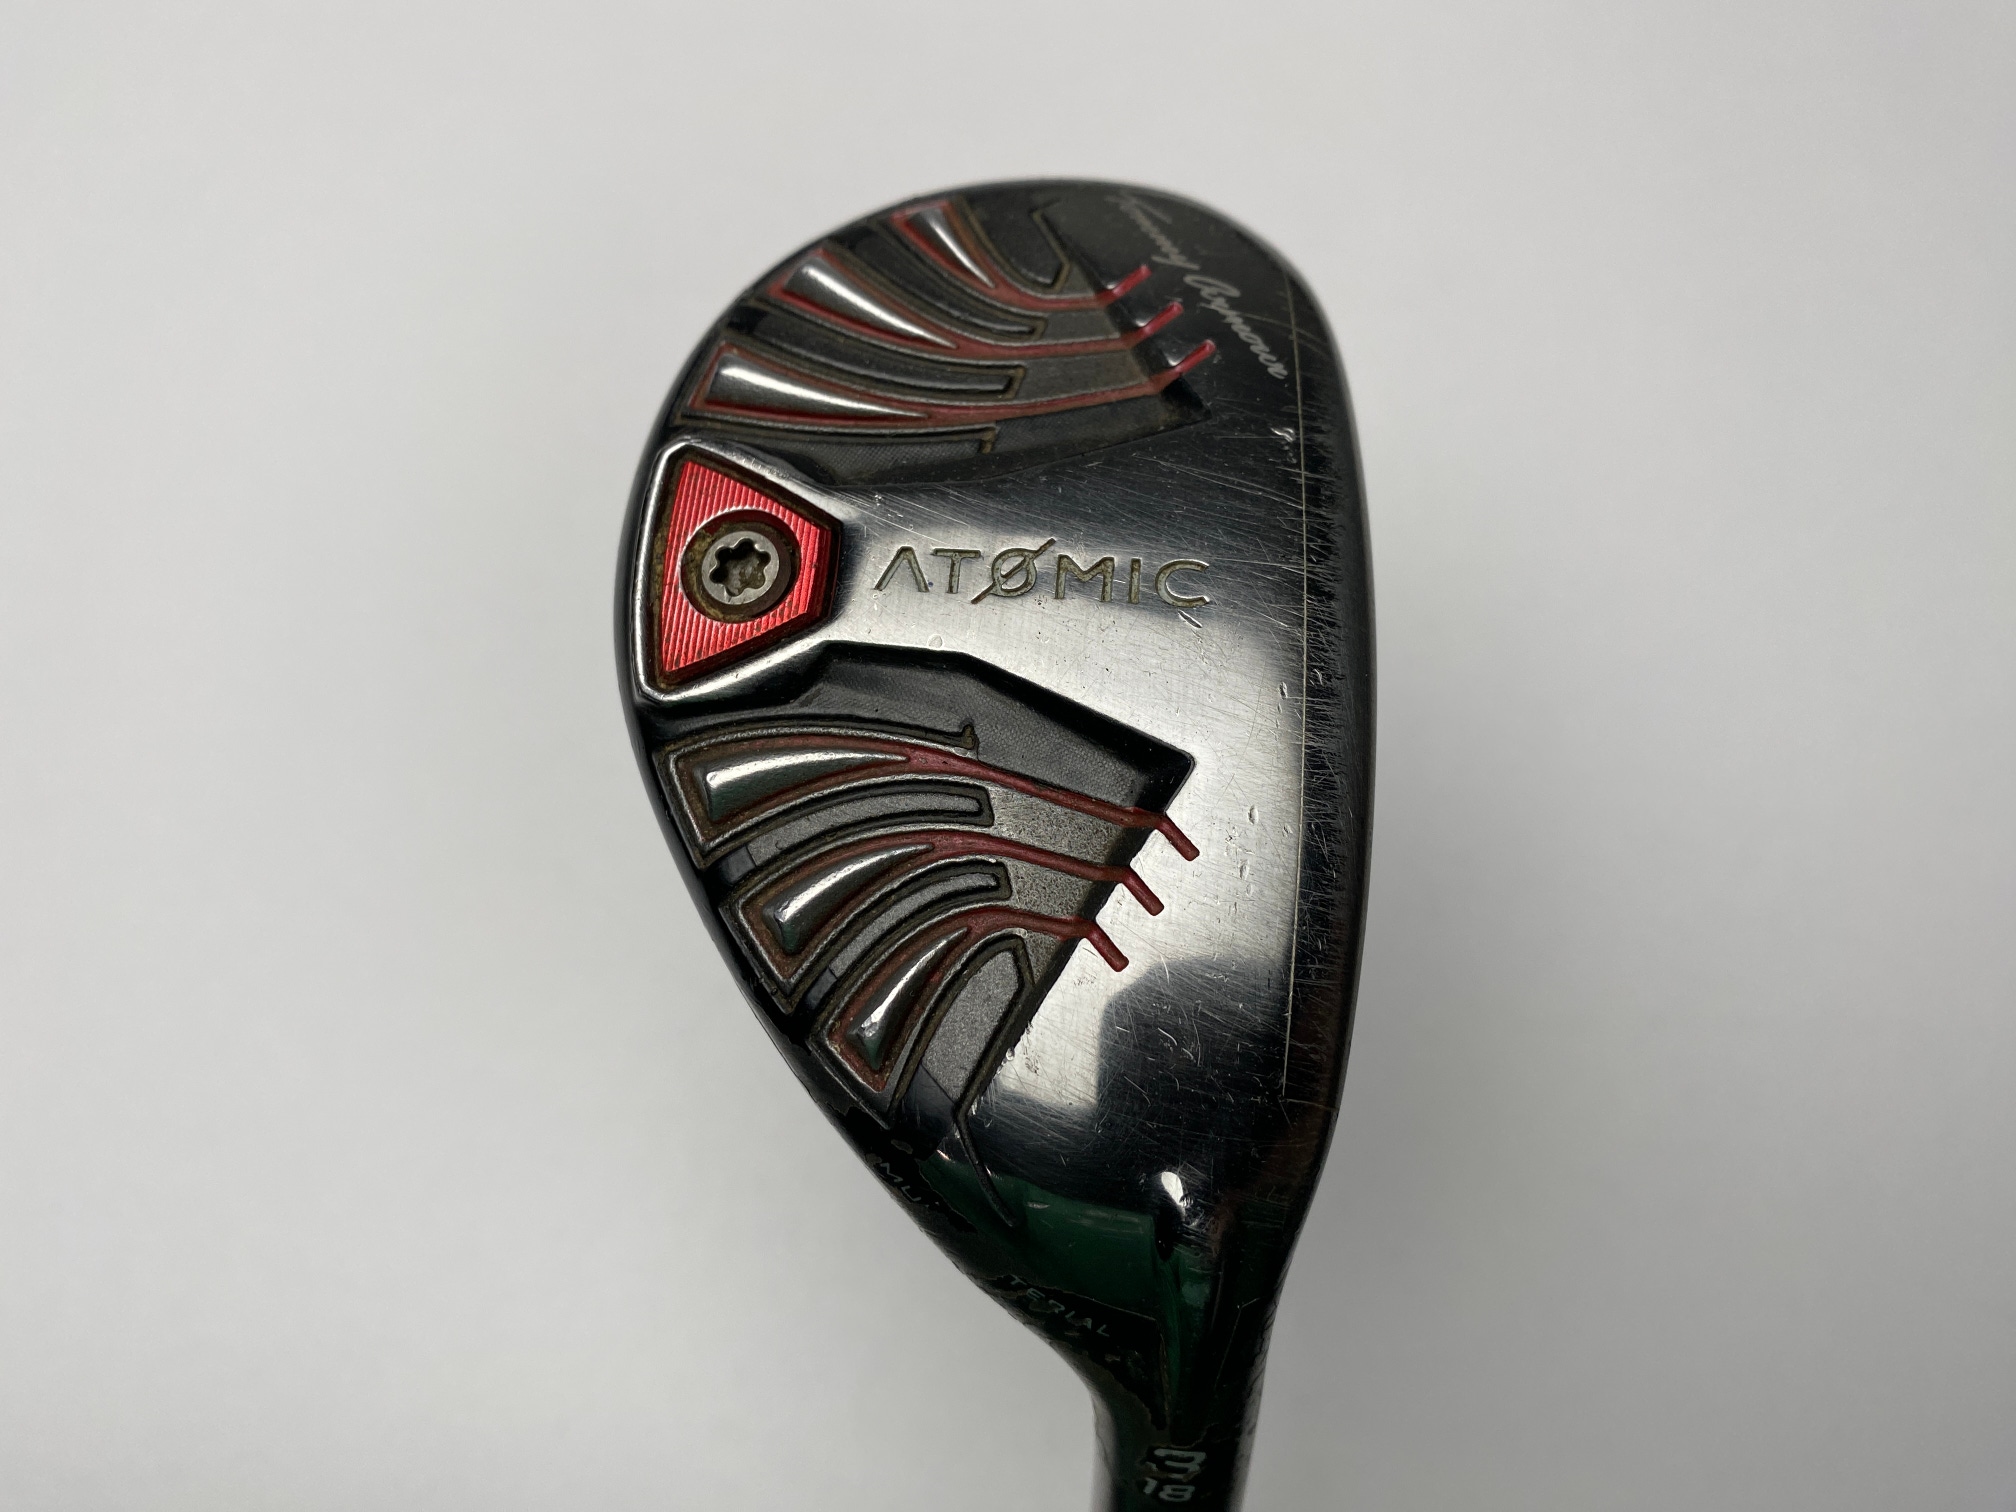 Tommy Armour Atomic 3 Hybrid 18* Project X EvenFlow Max Carry 6.0 Stiff RH